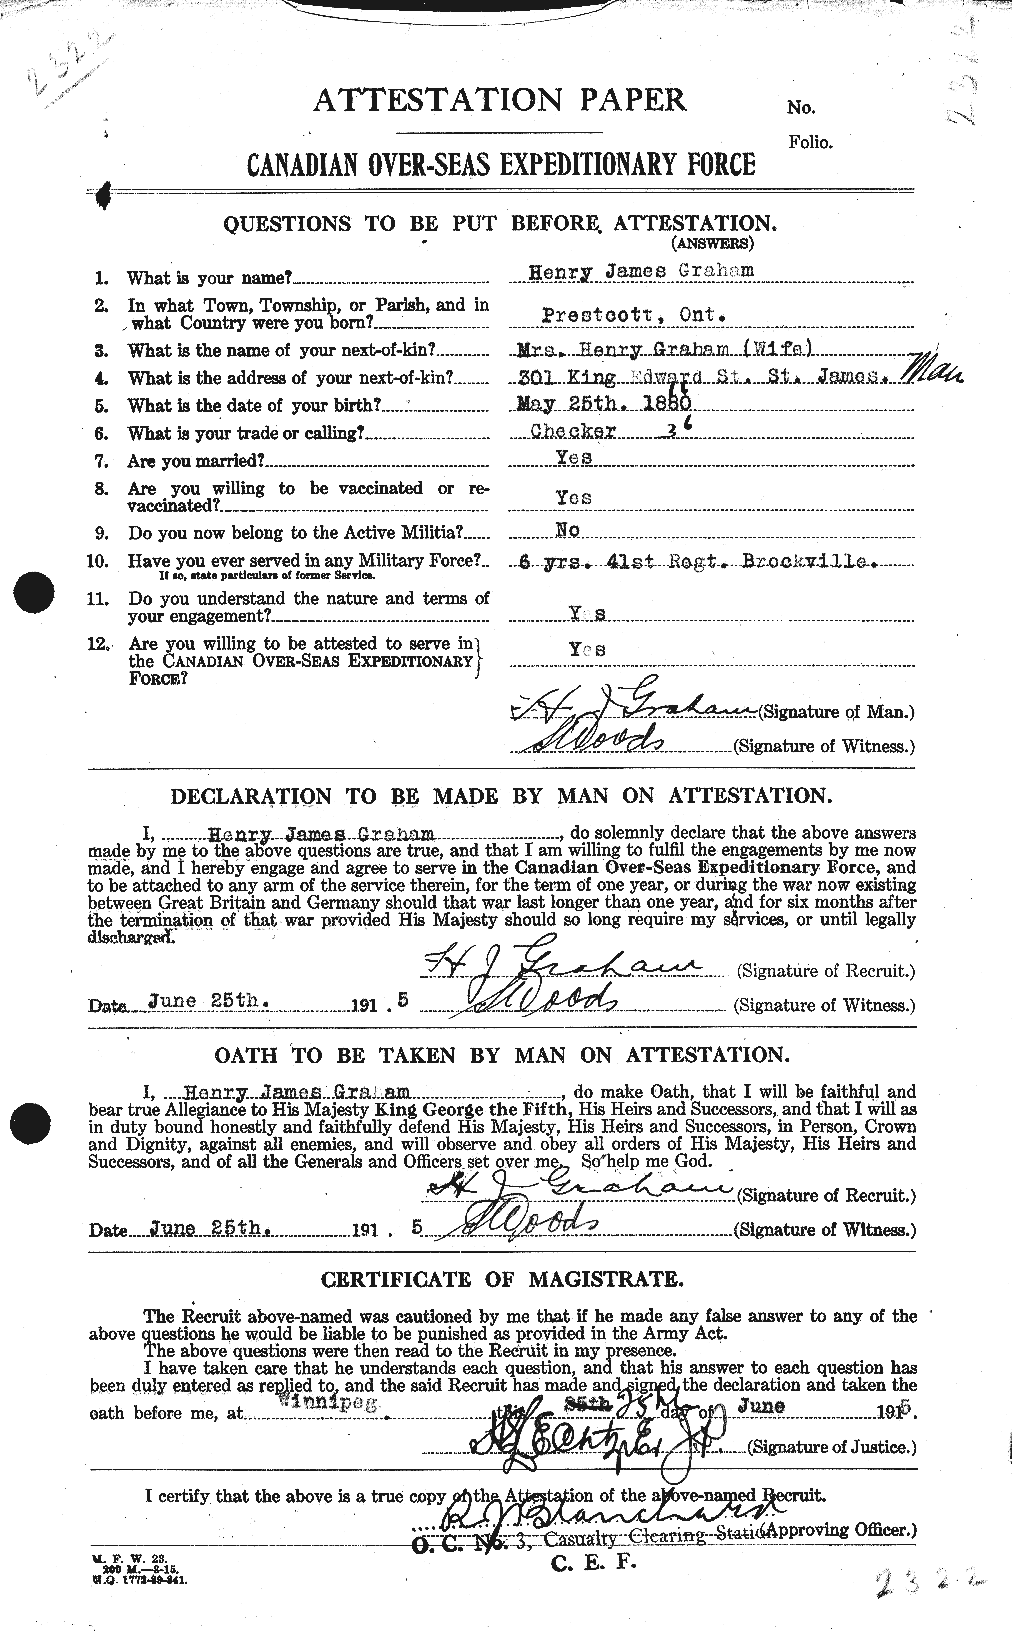 Personnel Records of the First World War - CEF 357737a